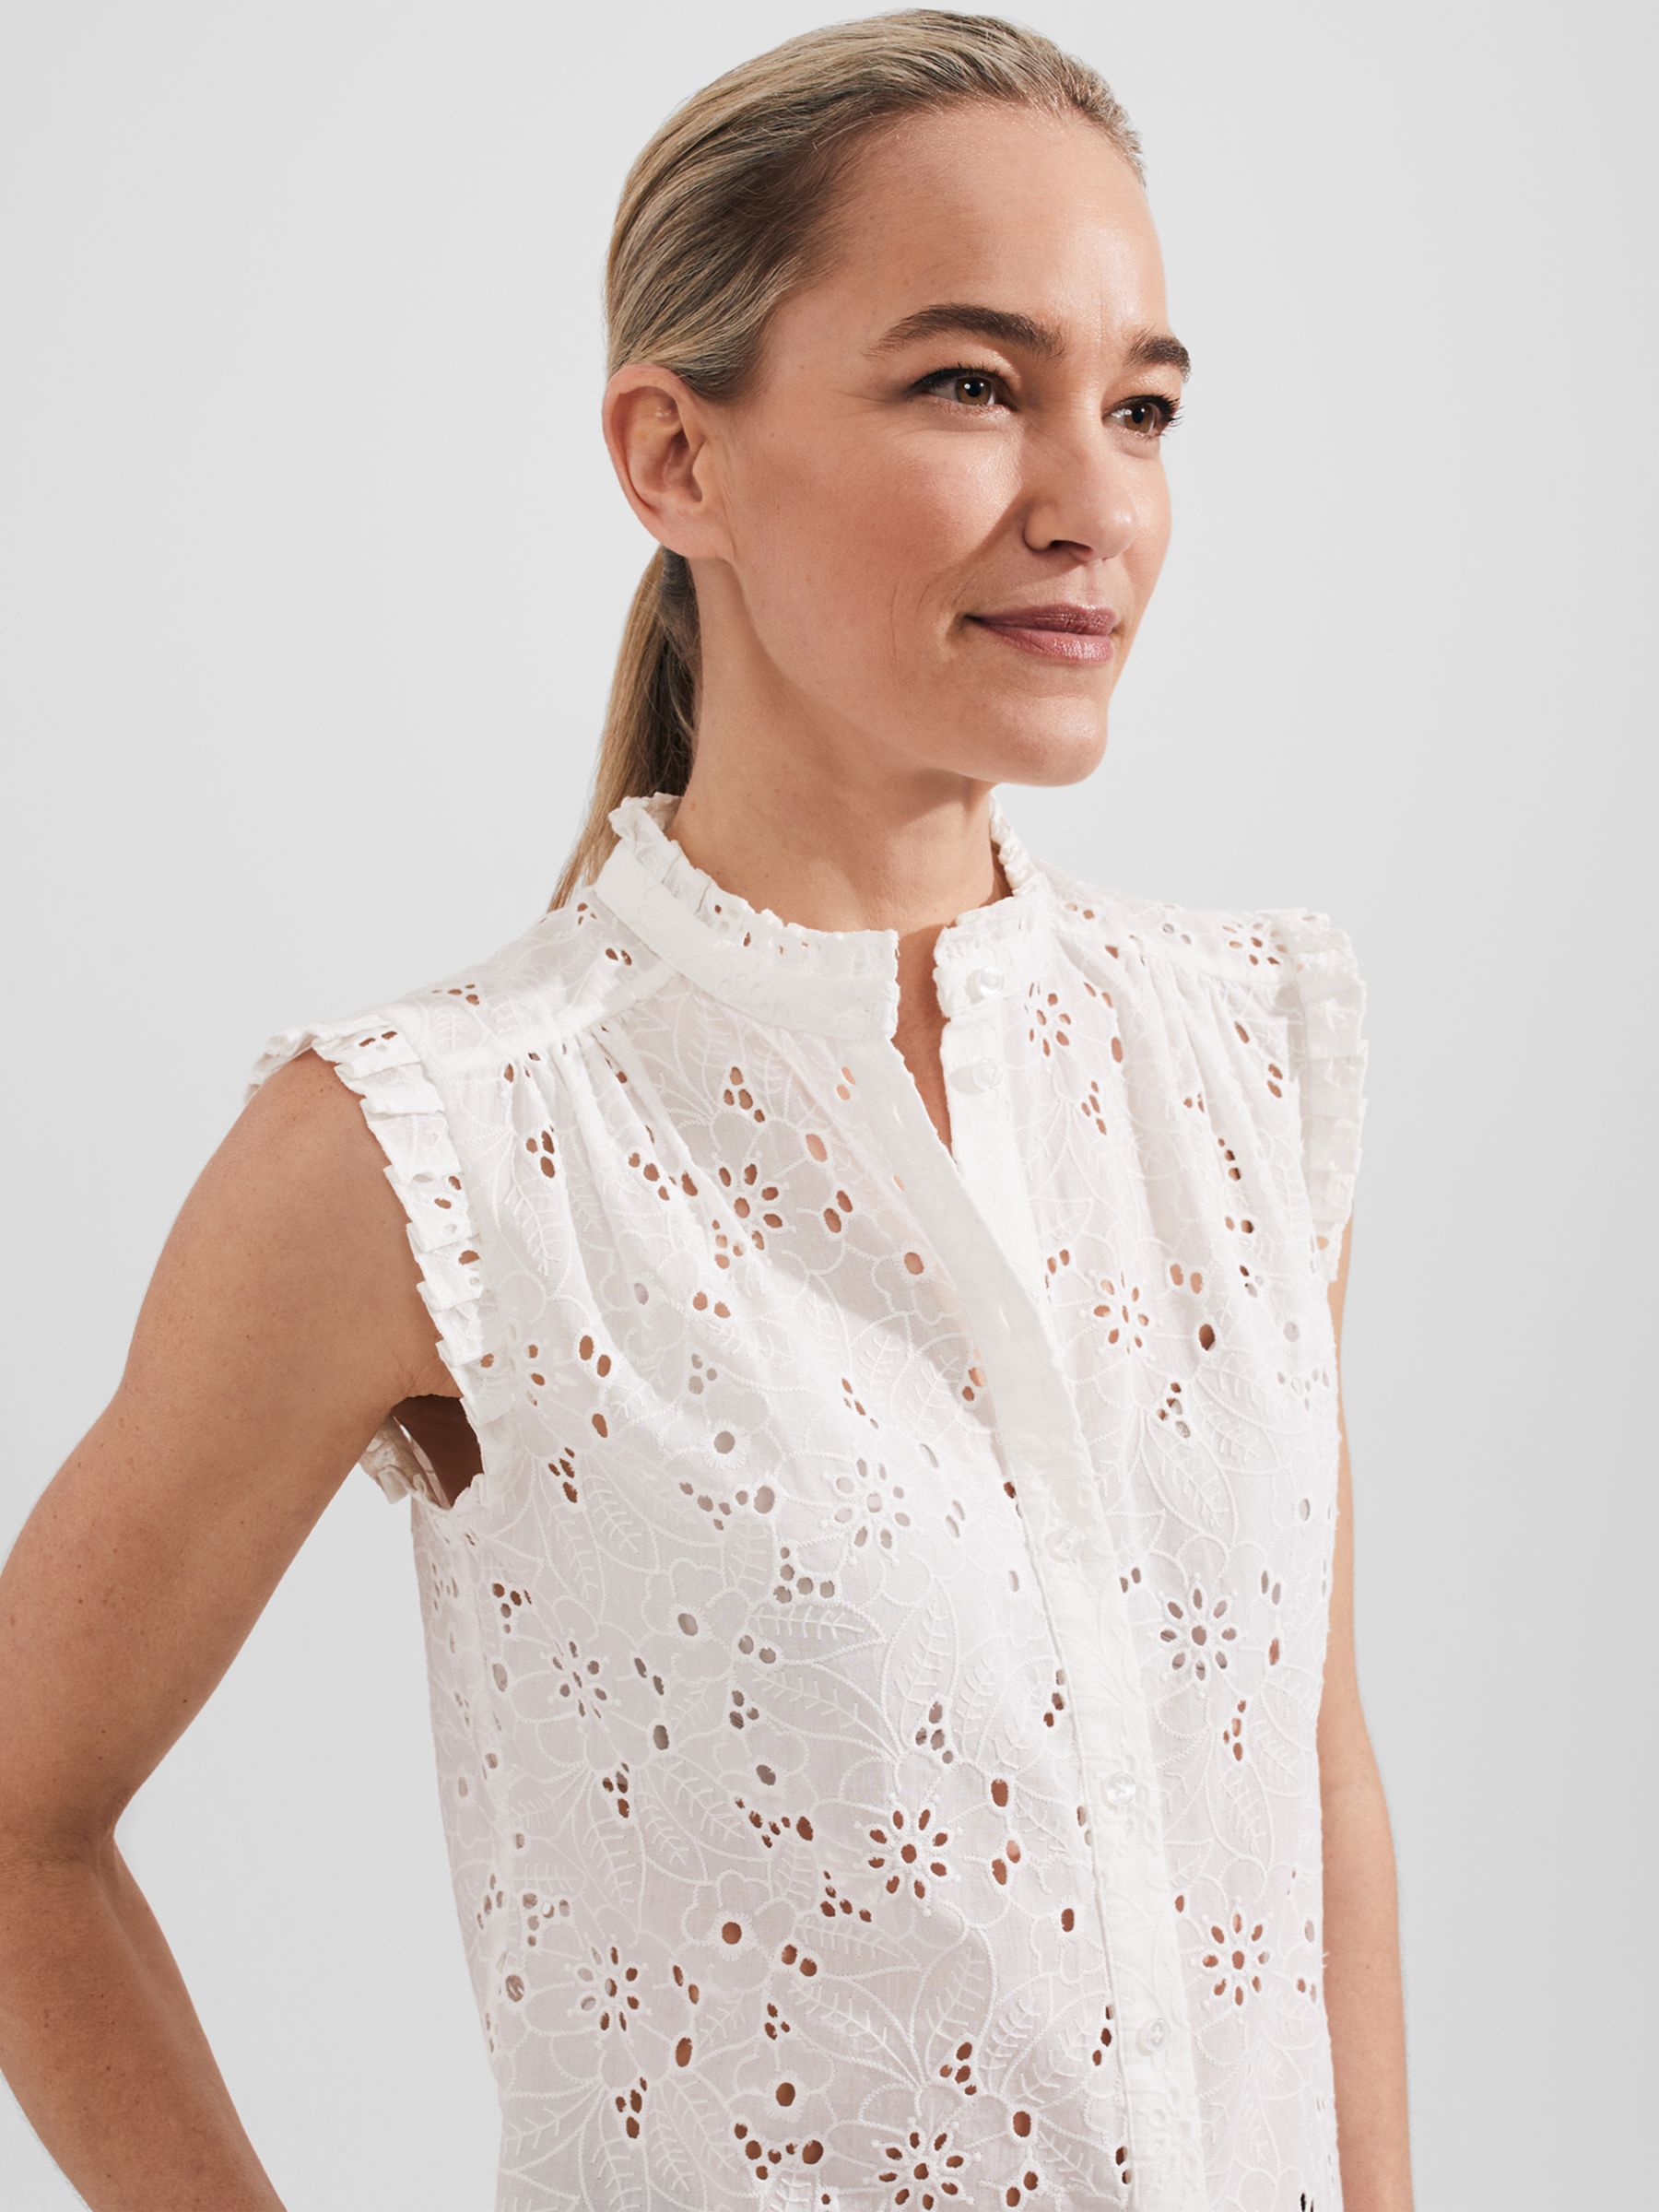 Hobbs Clementine Top, White at John Lewis & Partners